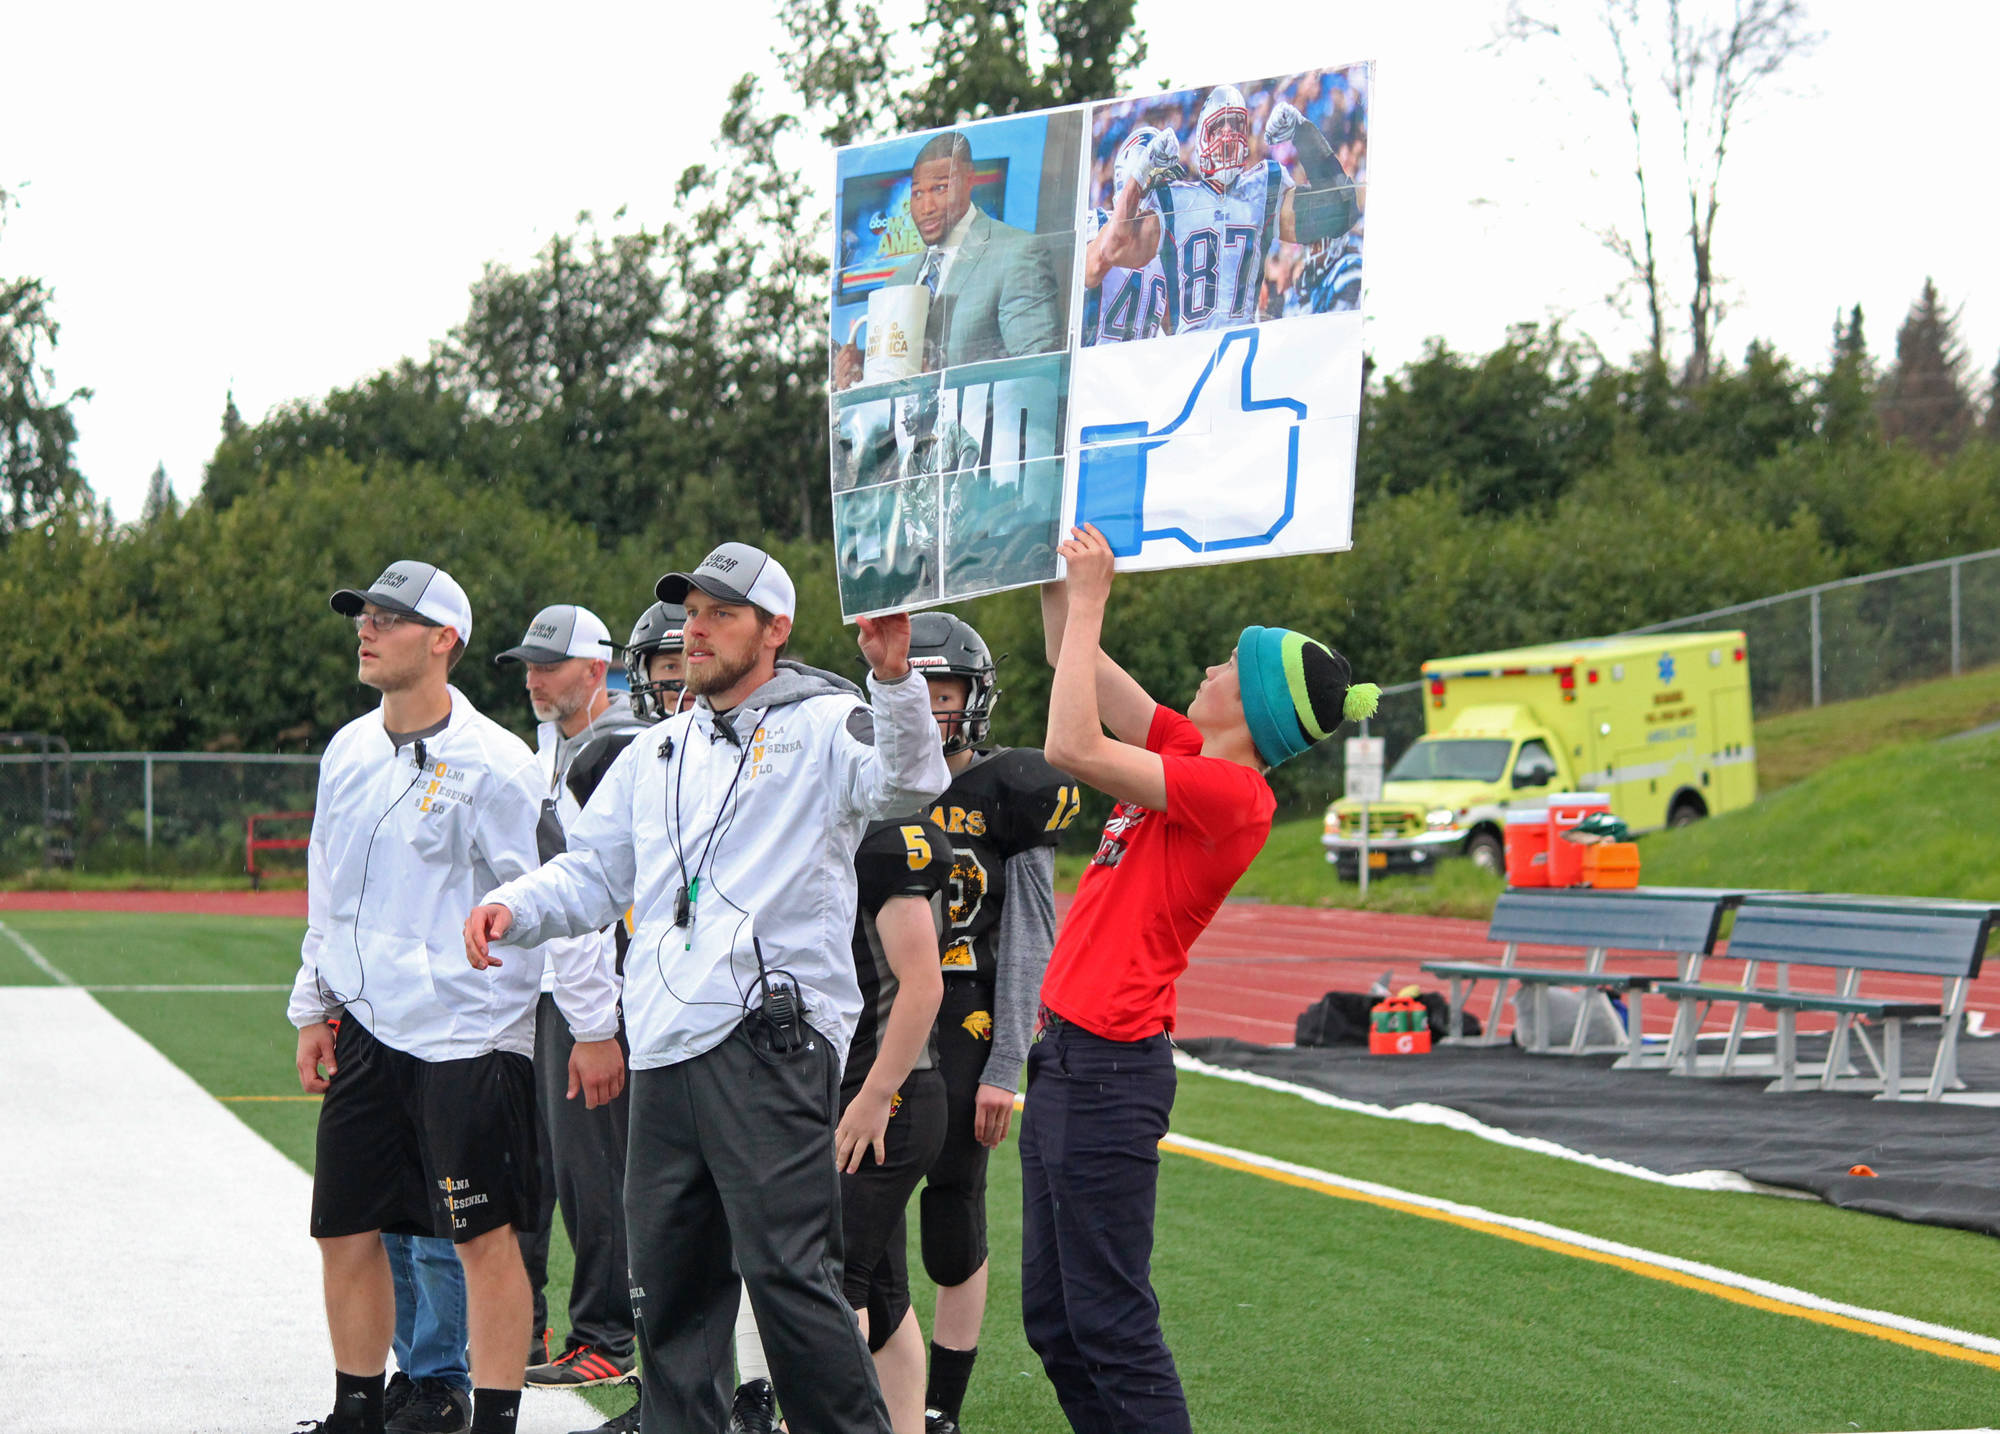 Cougars Head Coach Justin Zank helps hold up a sign to communicate plays to his team during their game against Nikiski High School on Saturday, Sept. 2, 2017 in Homer, Alaska. Zank uses pictures to represent the names of plays. One sign Saturday contained a play written in Cyrillic. (Photo by Megan Pacer/Homer News)